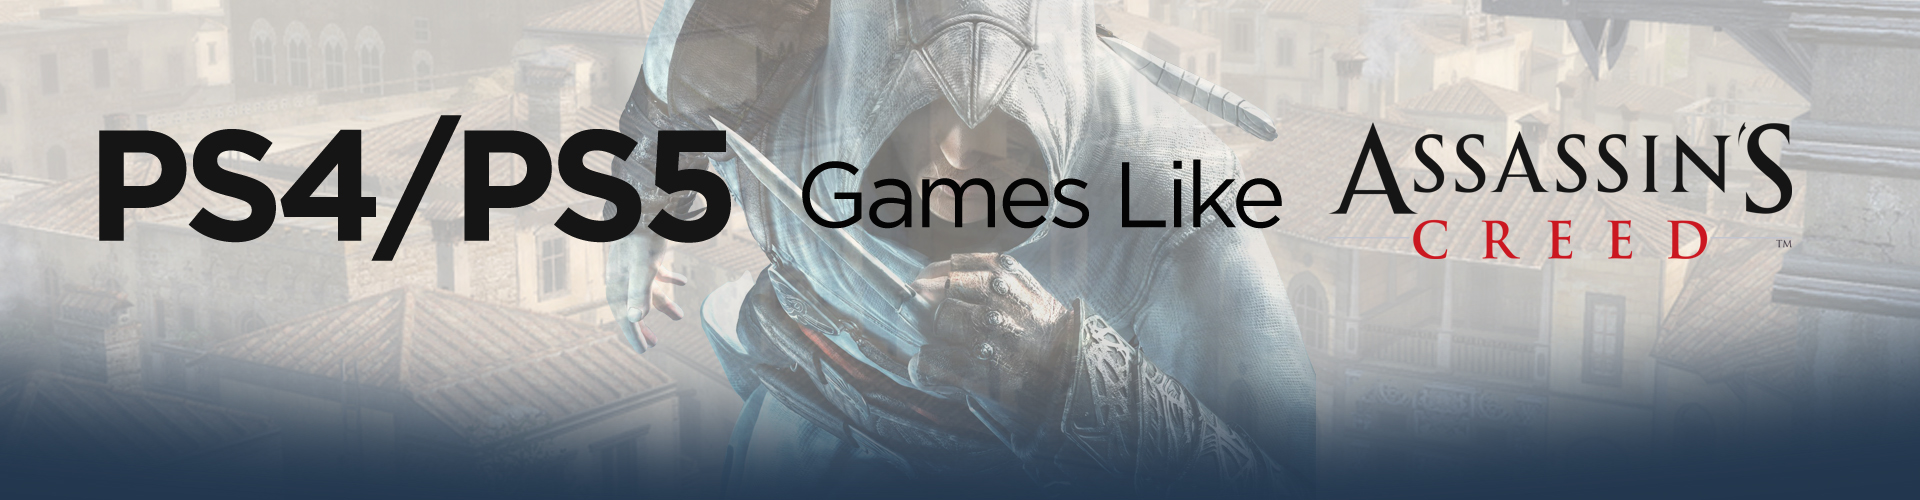 Best Games Like Assassin's Creed for PS4/PS5